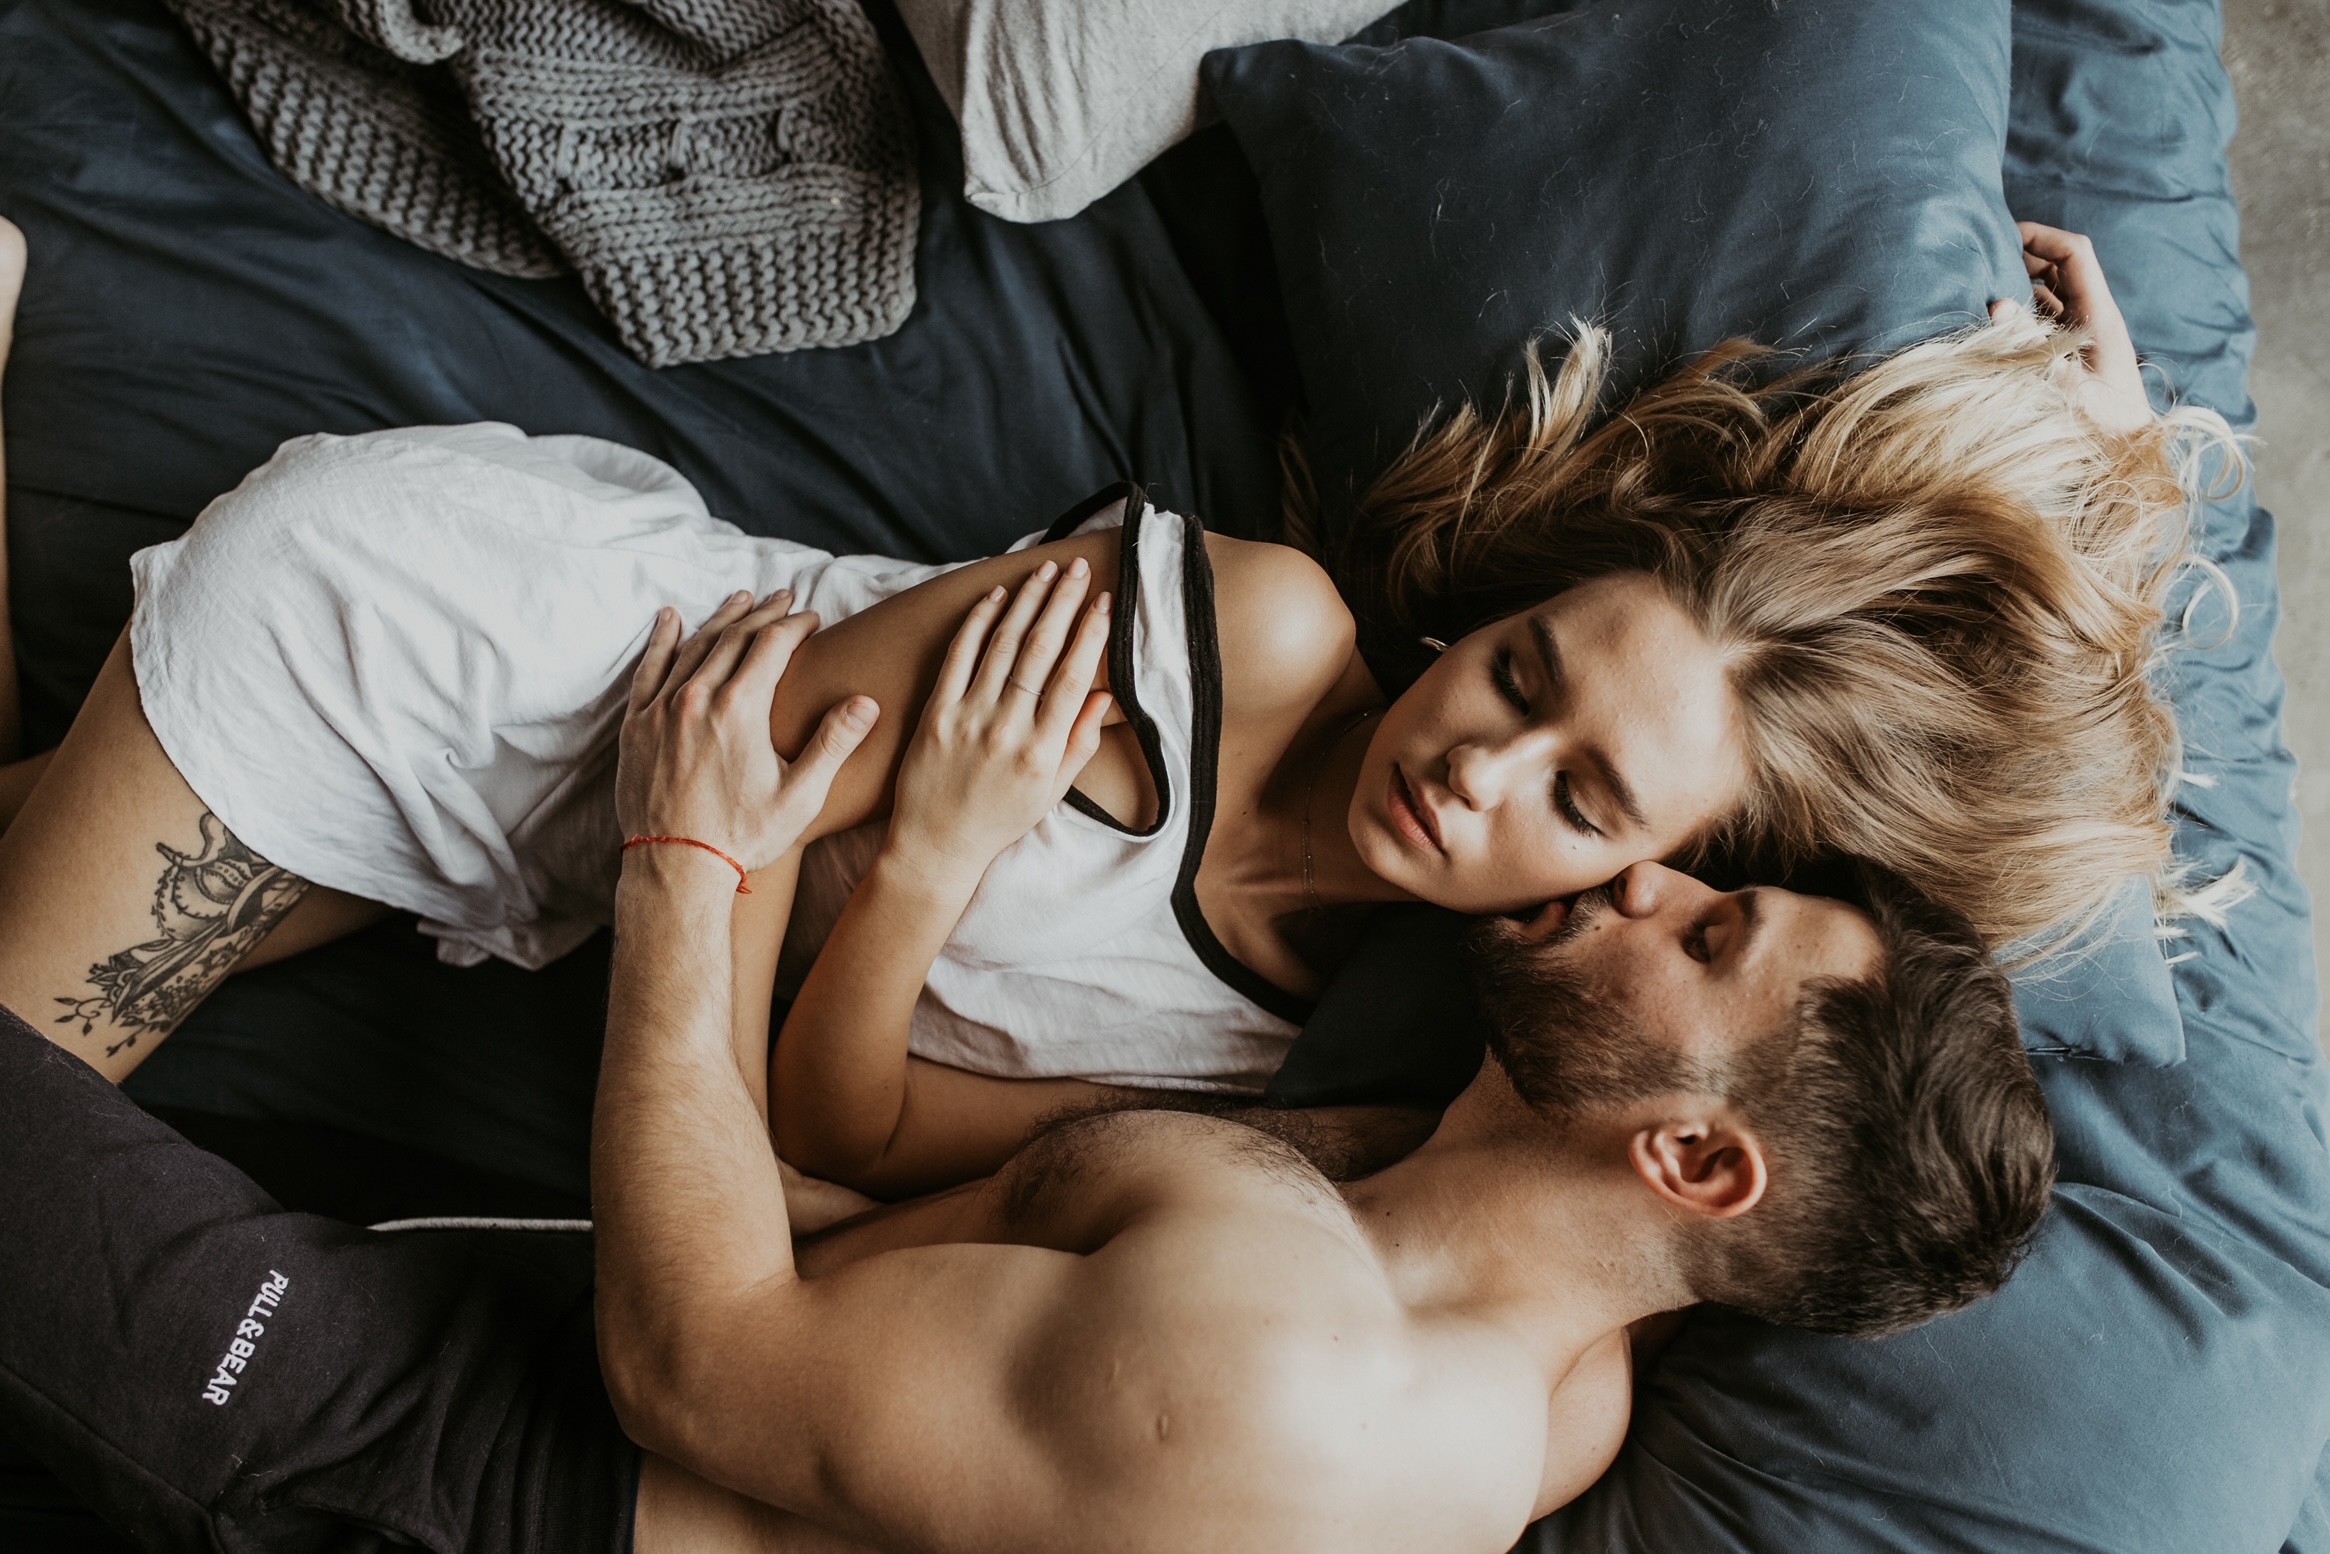 100 Free Date Sites to Find Your Next One-Night Stand